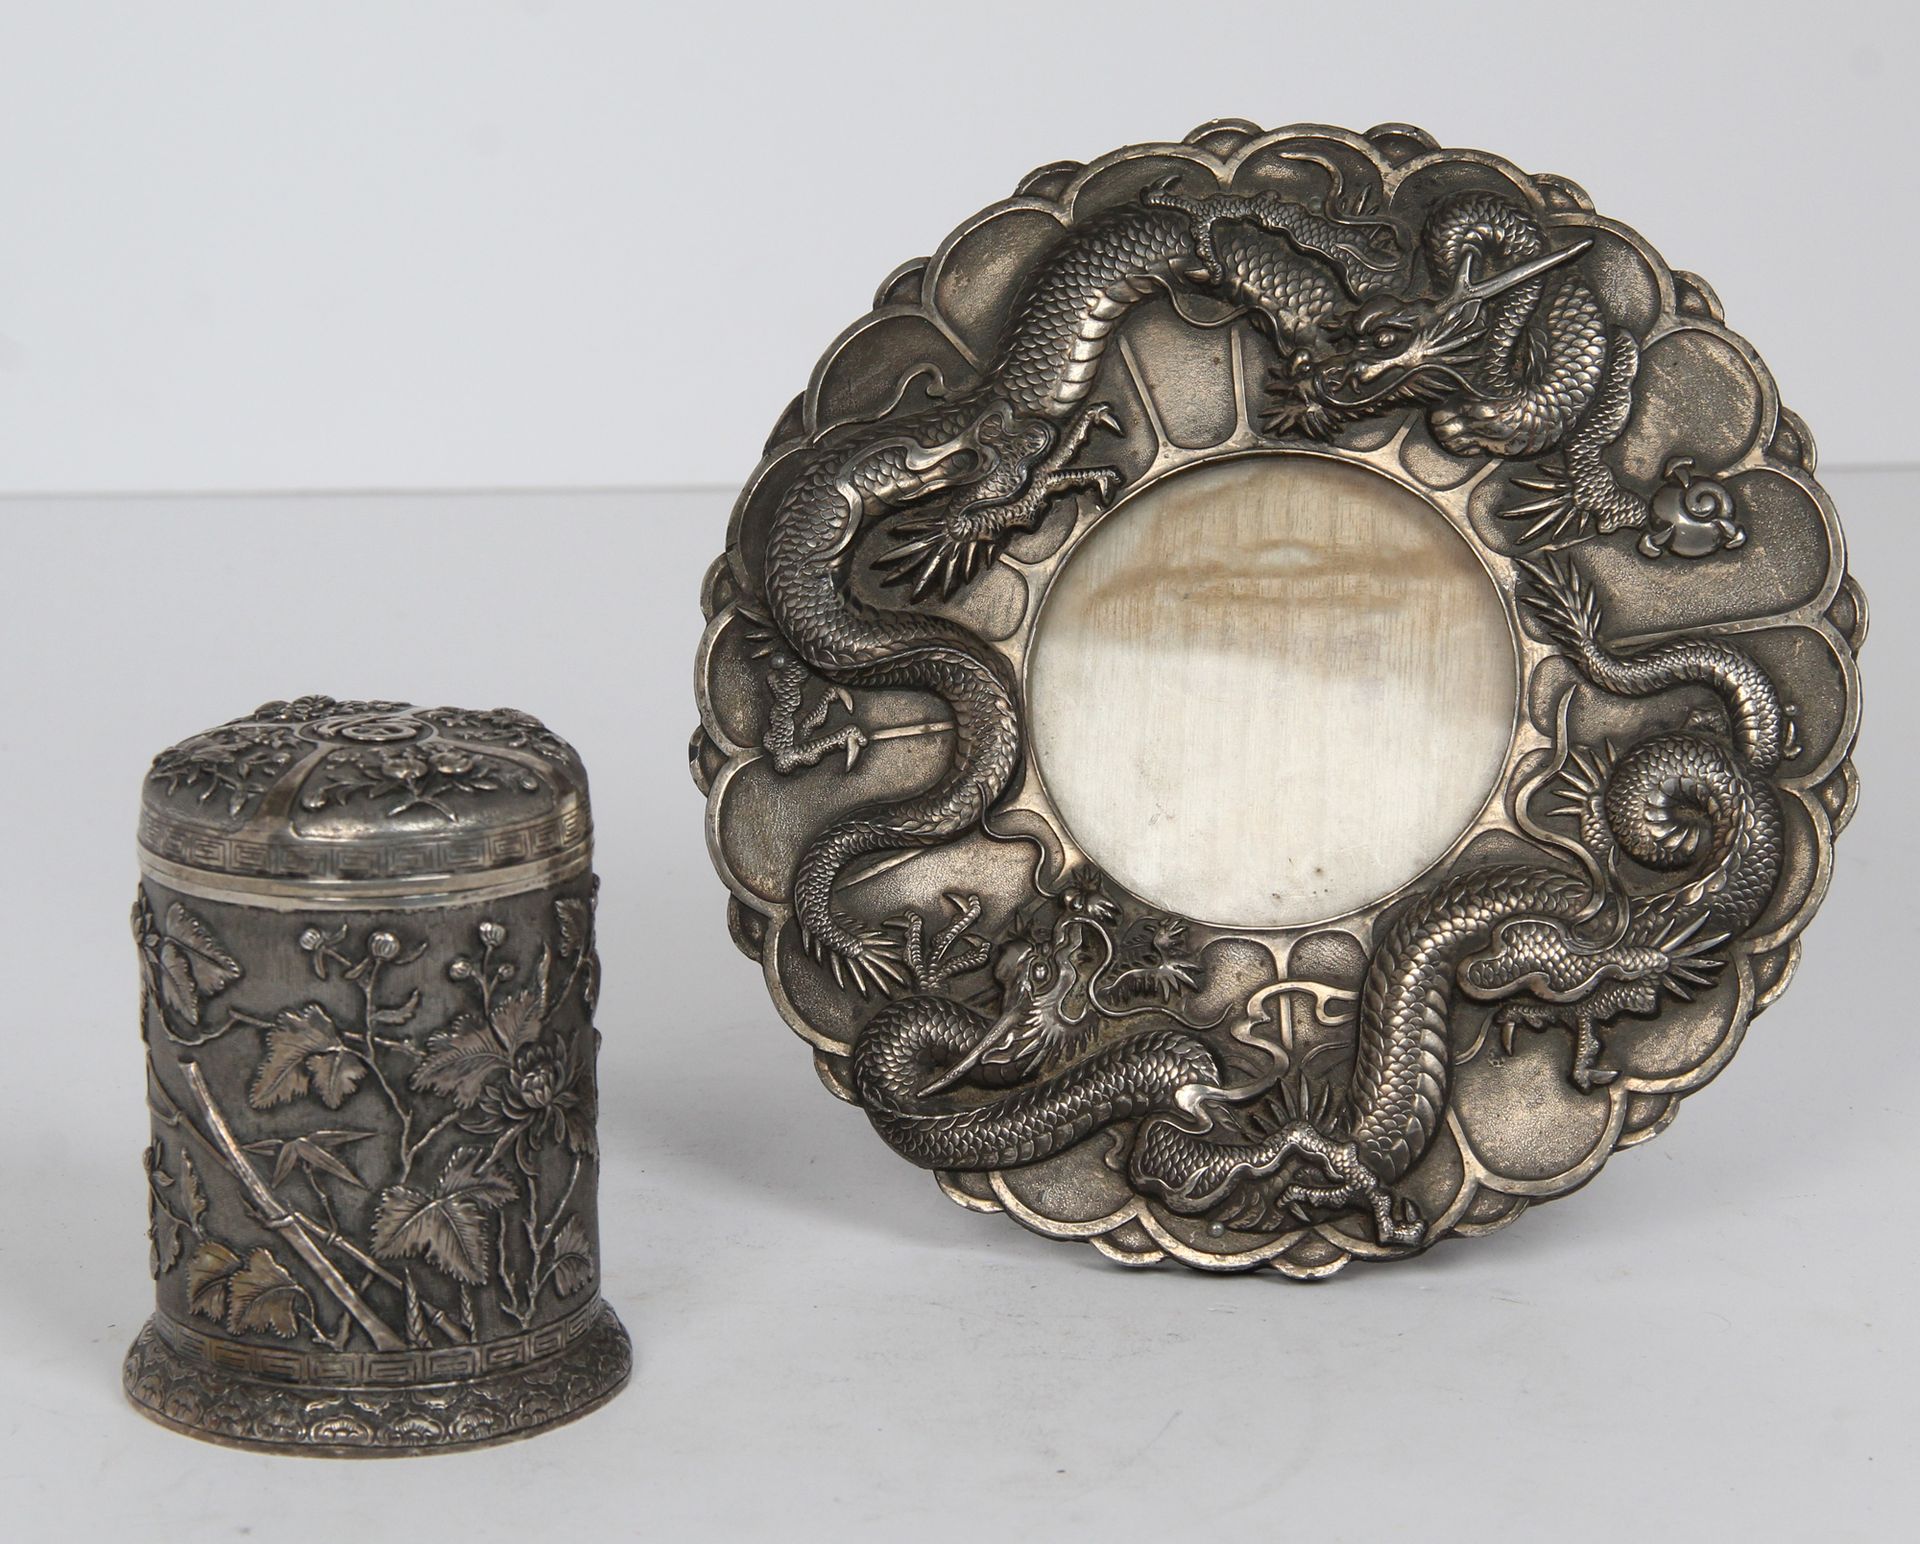 Null SOUTH-VIETNAM CHINA, EARLY-MID 20TH CENTURY

Set of two pieces in silver-pl&hellip;